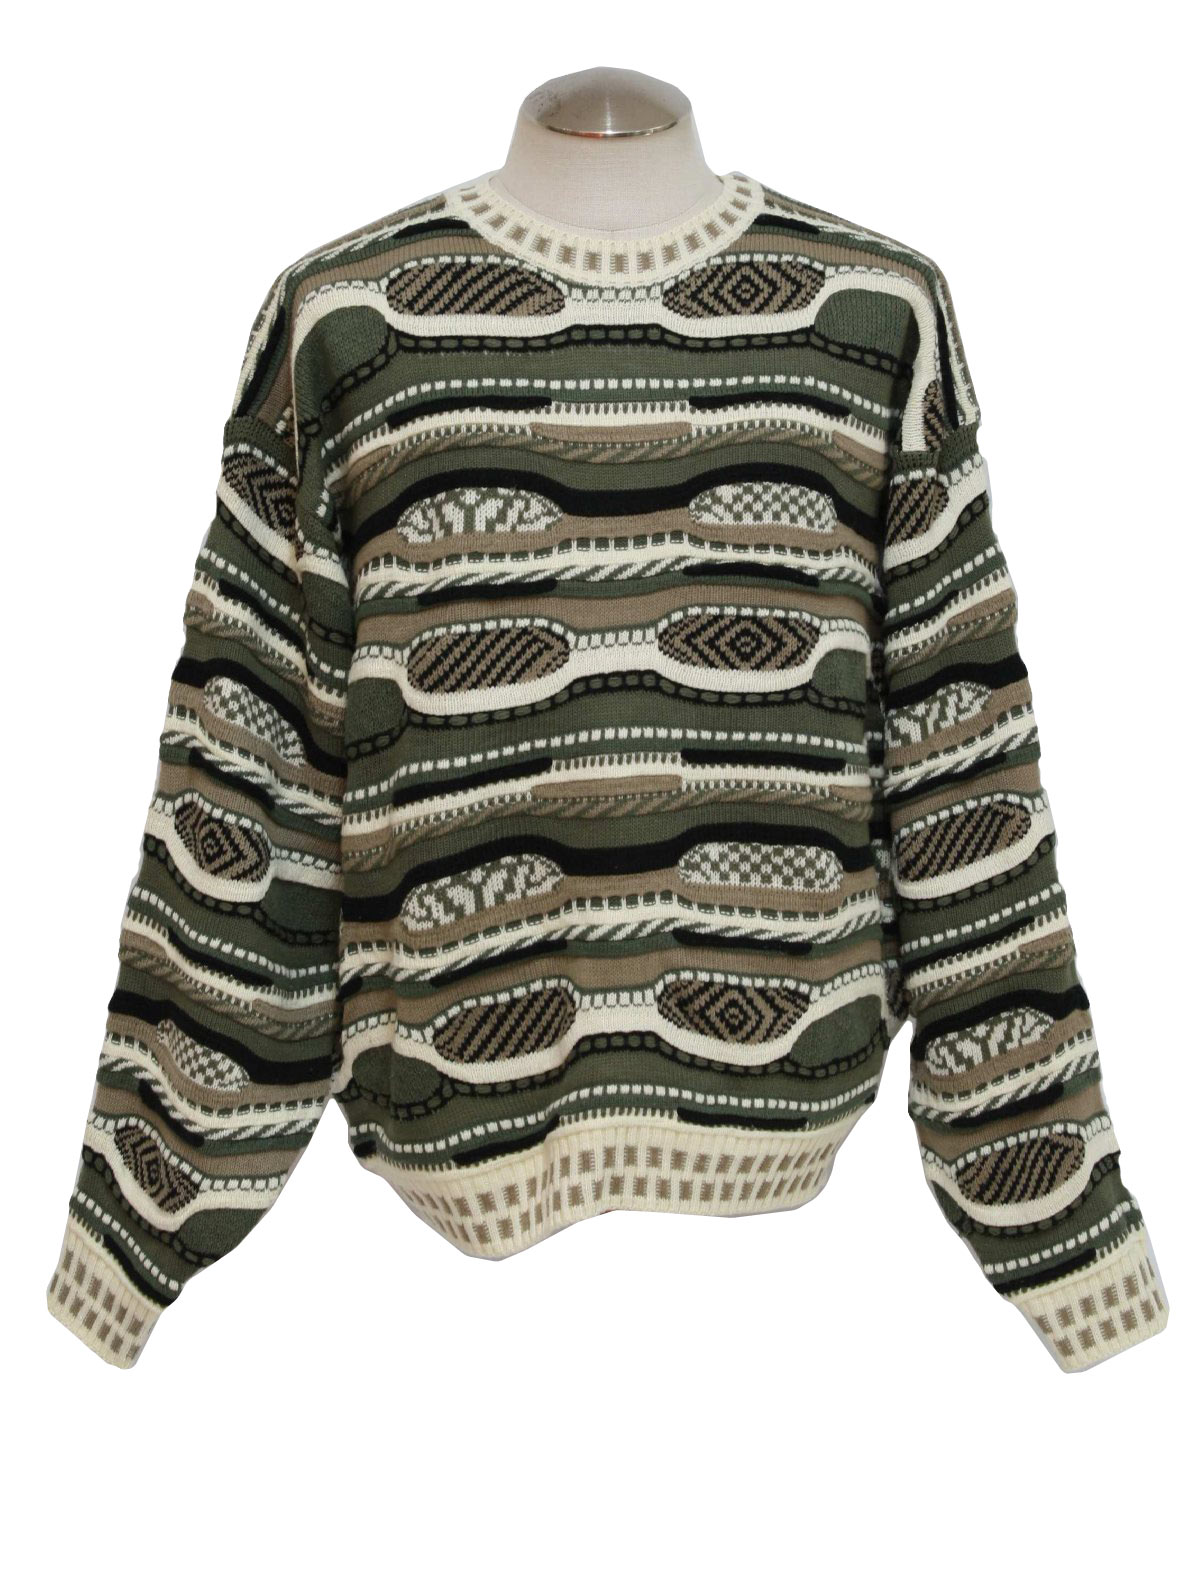 Sweater: 80s or early 90s -Bachrach- Mens white, sage green, tan and ...